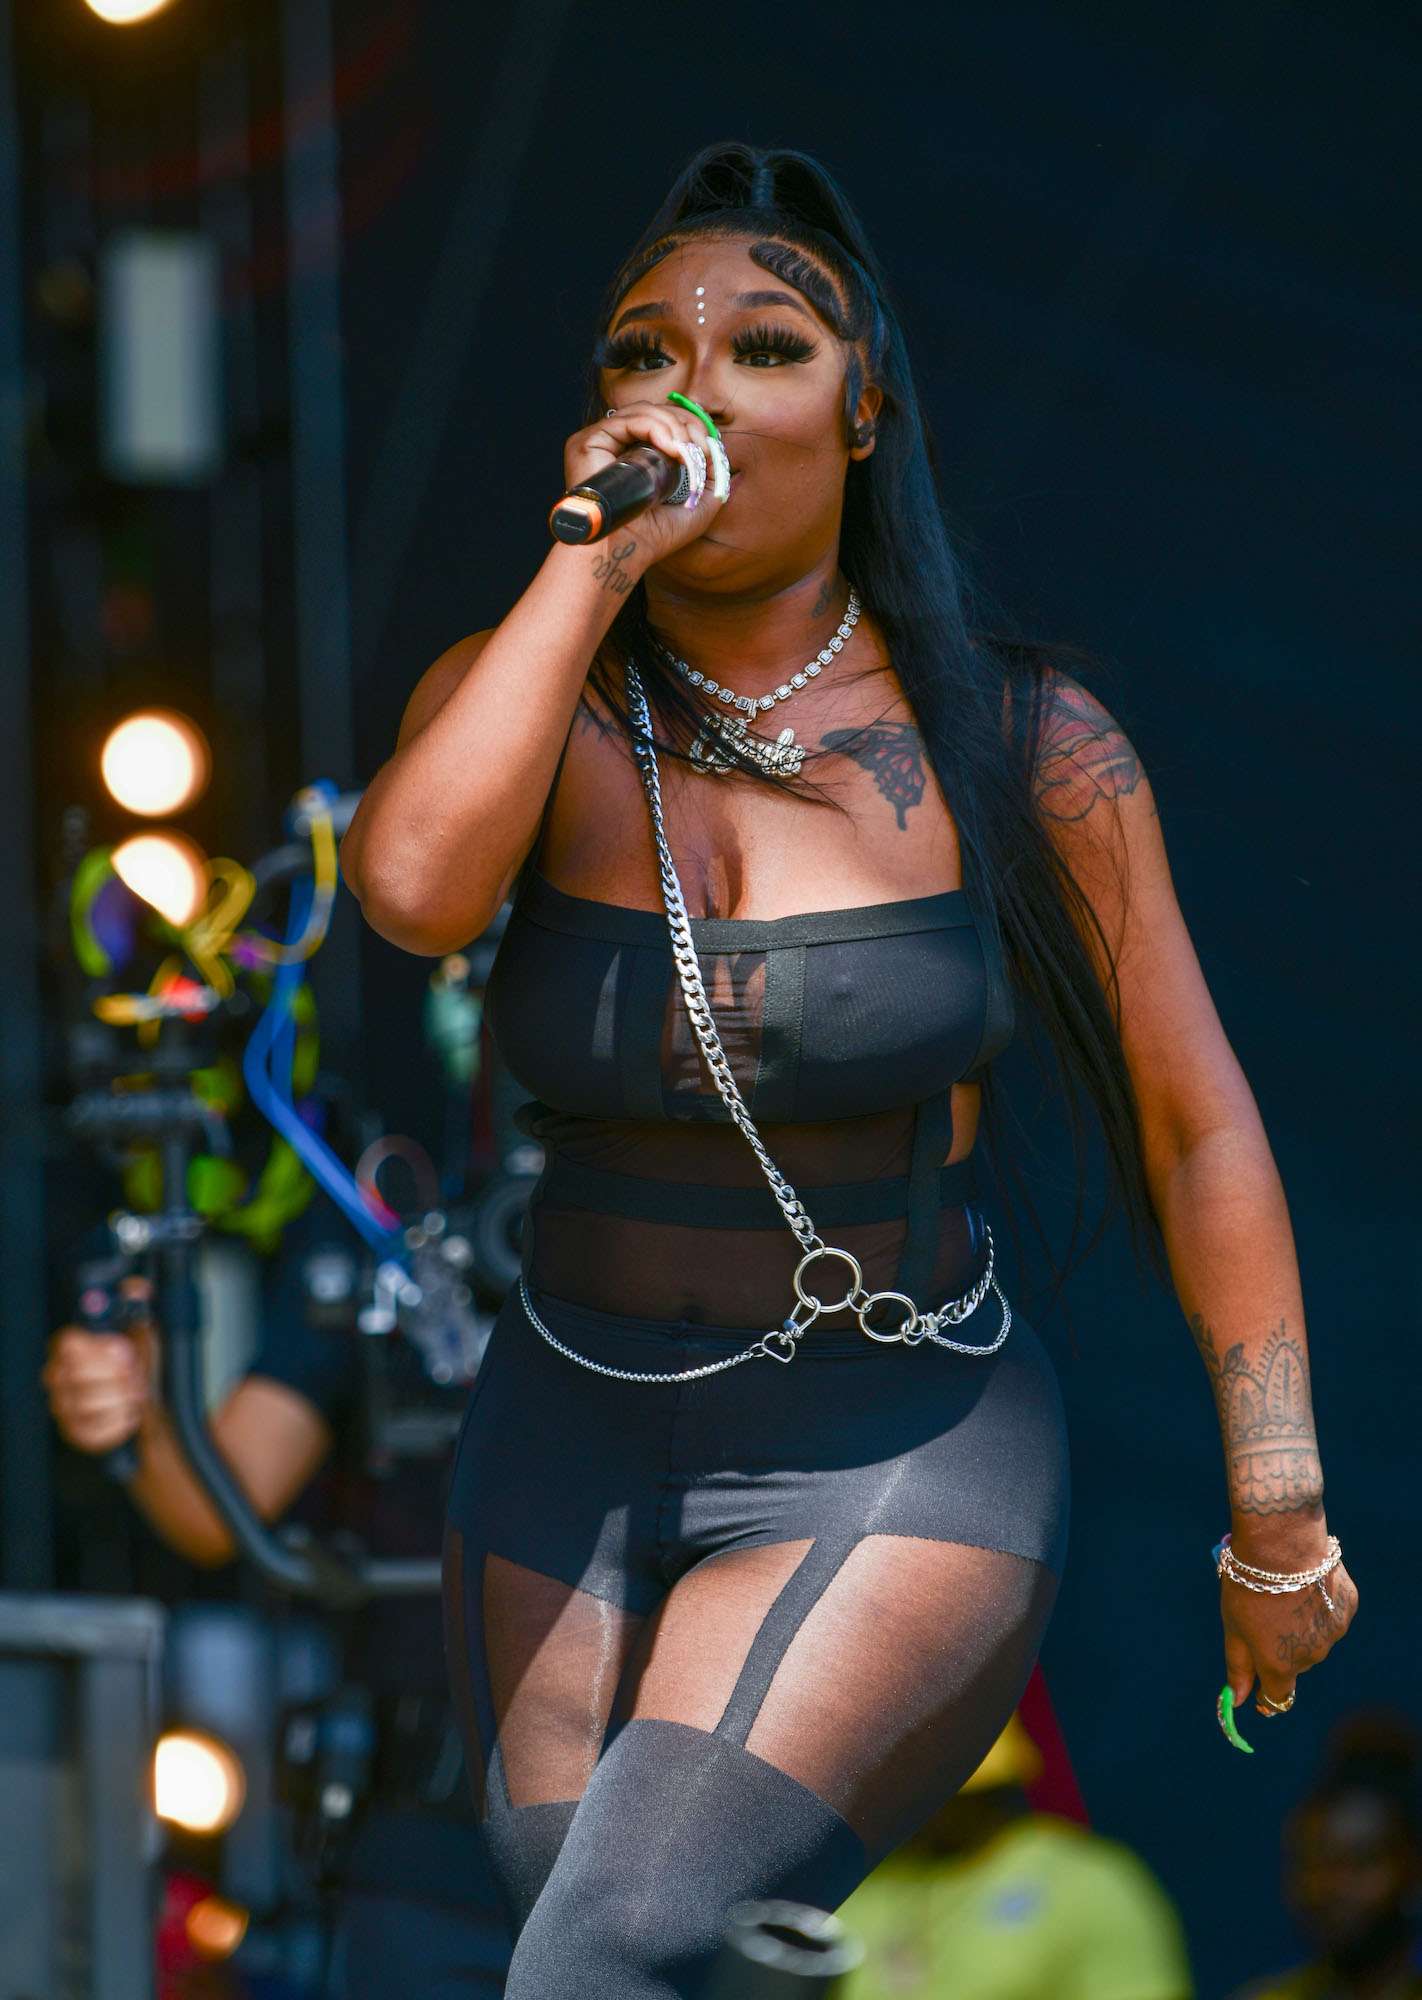 Erica Banks Live at Lollapalooza [GALLERY] 5